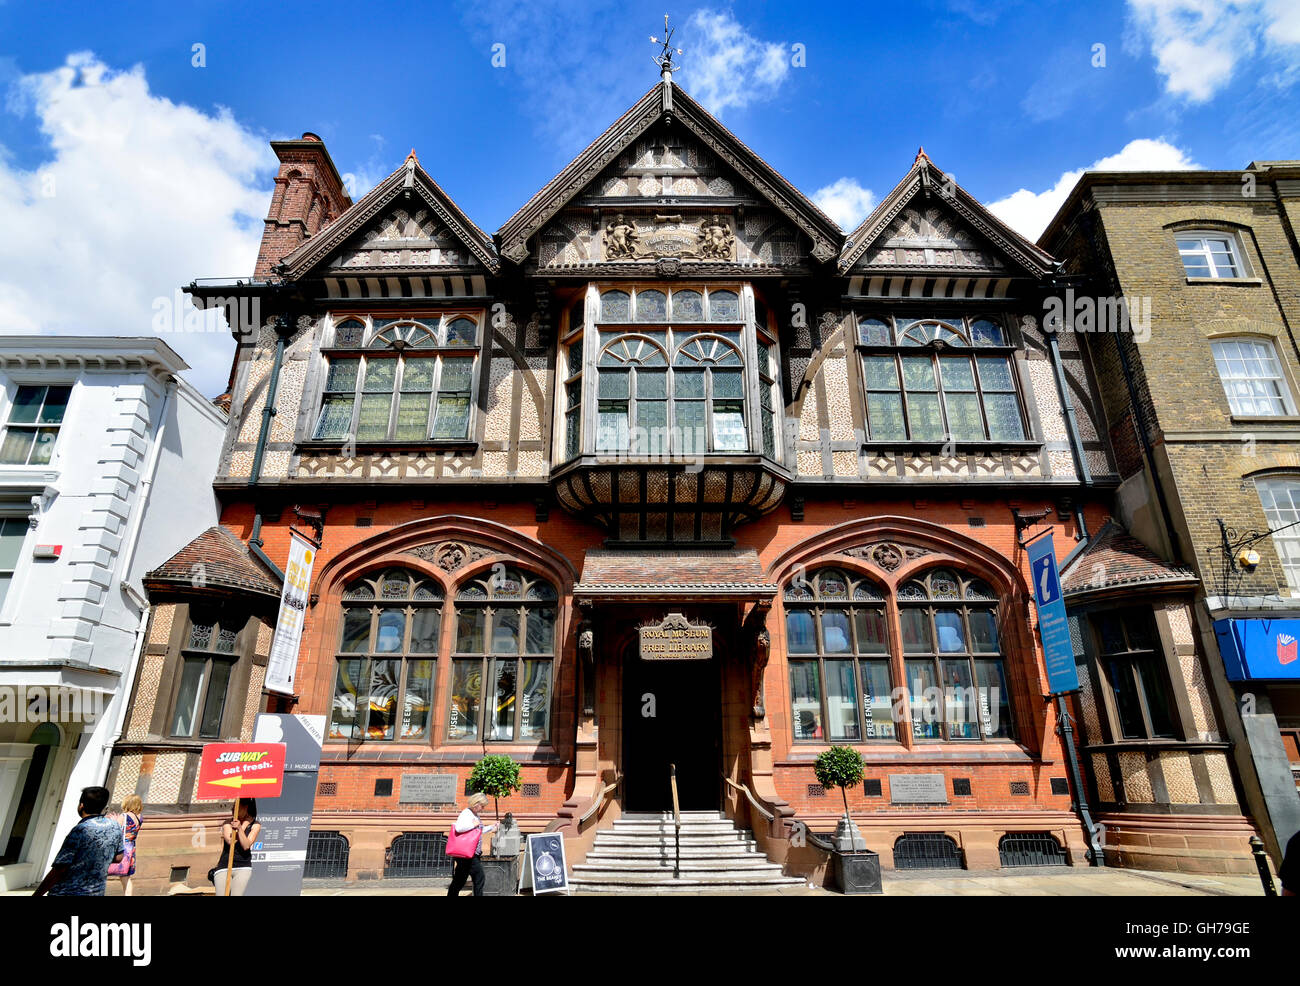 Canterbury, Kent, UK. Beaney House of Art and Knowledge - Royal Museum and Free Library at 18 High Street. Mock Tudor façade (1899) Stock Photo